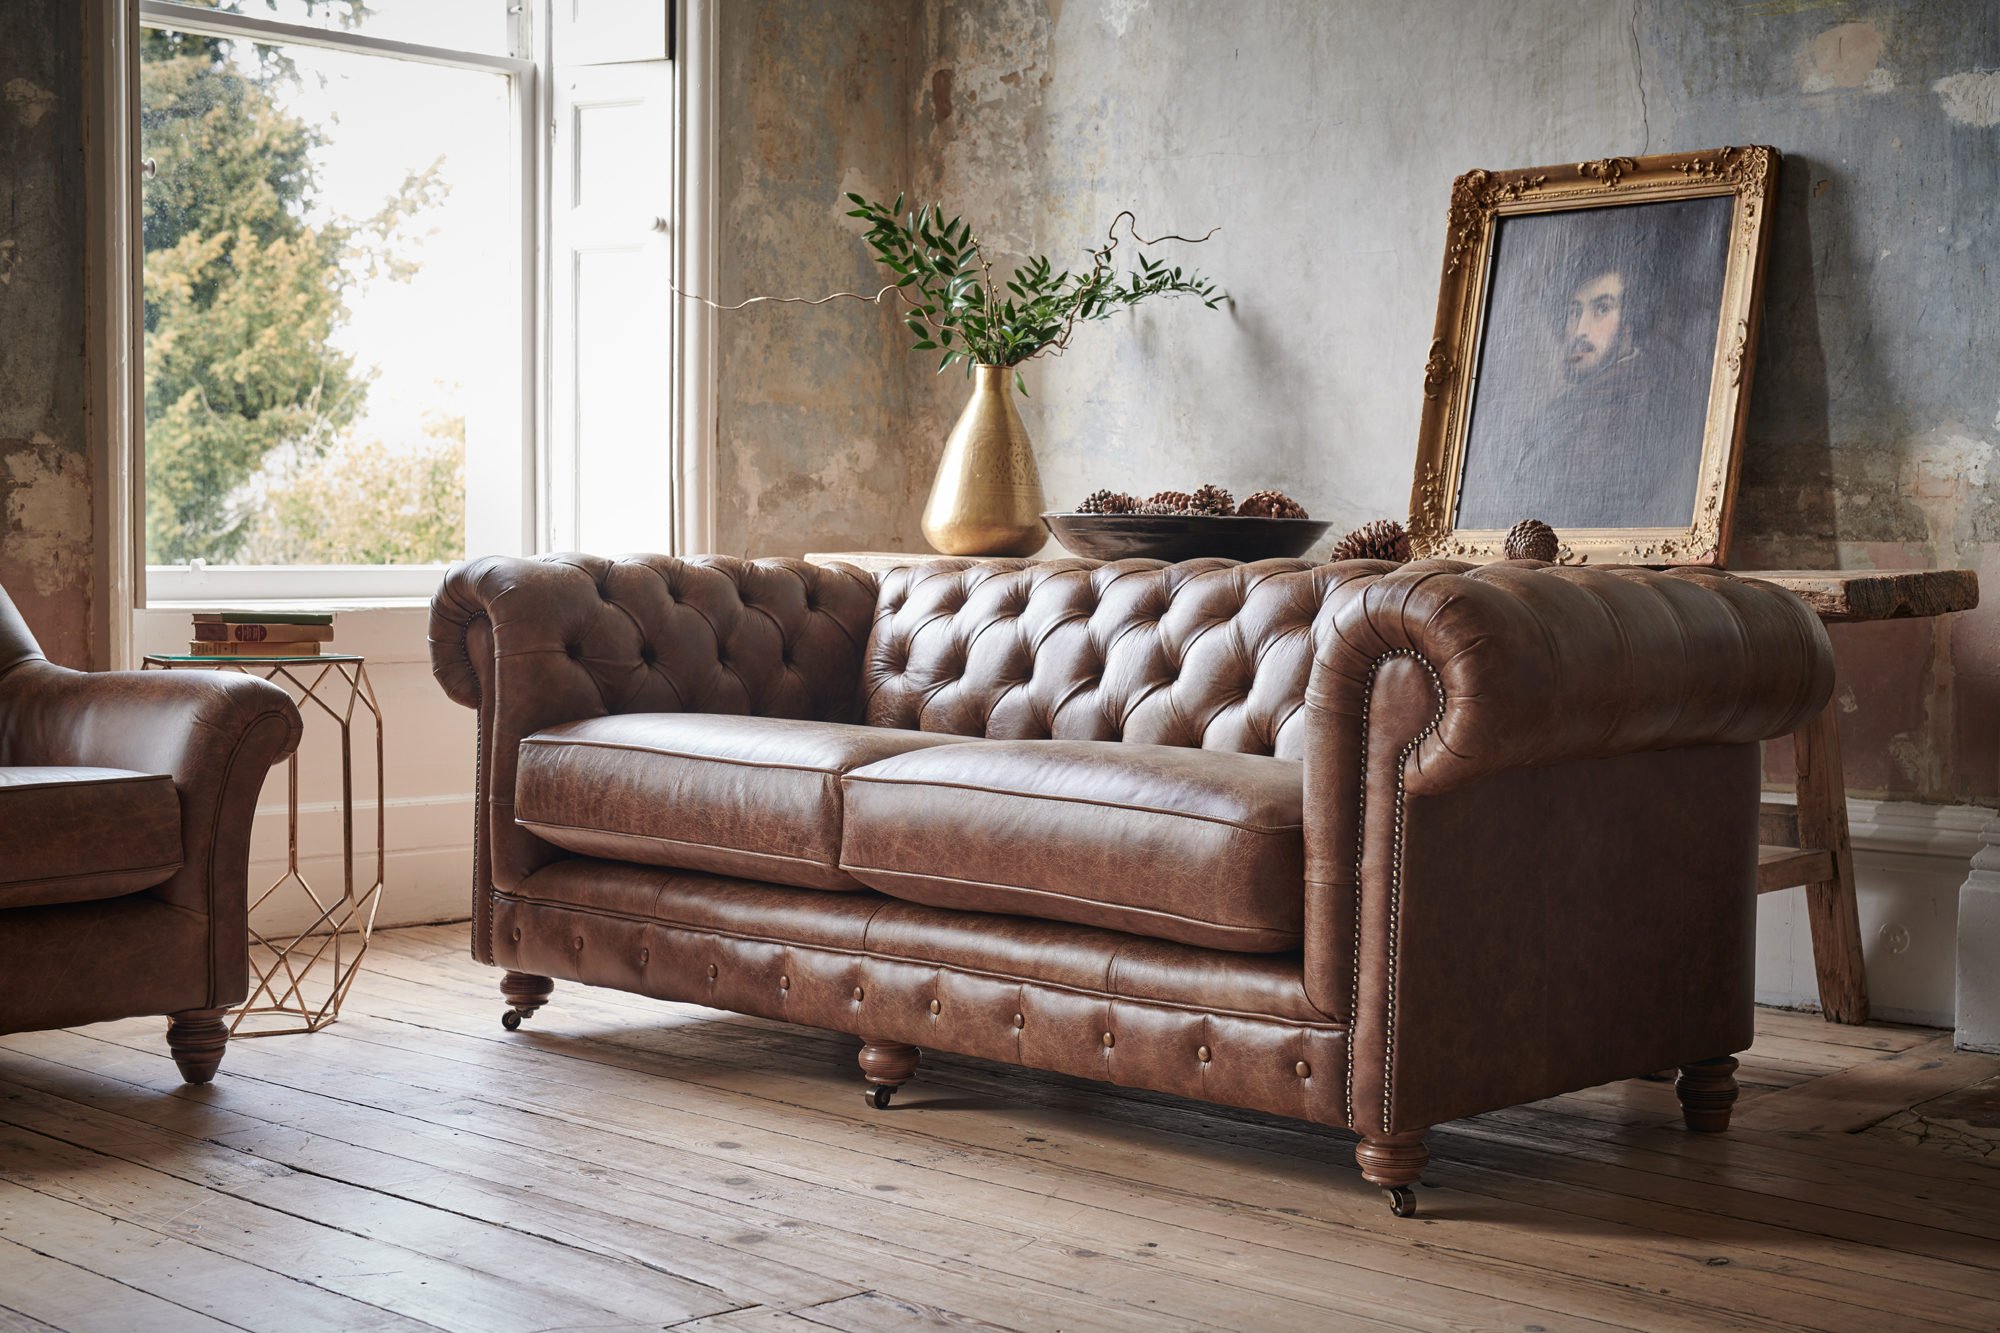 Chesterfield Leather Sofa, Brown Leather Chesterfield